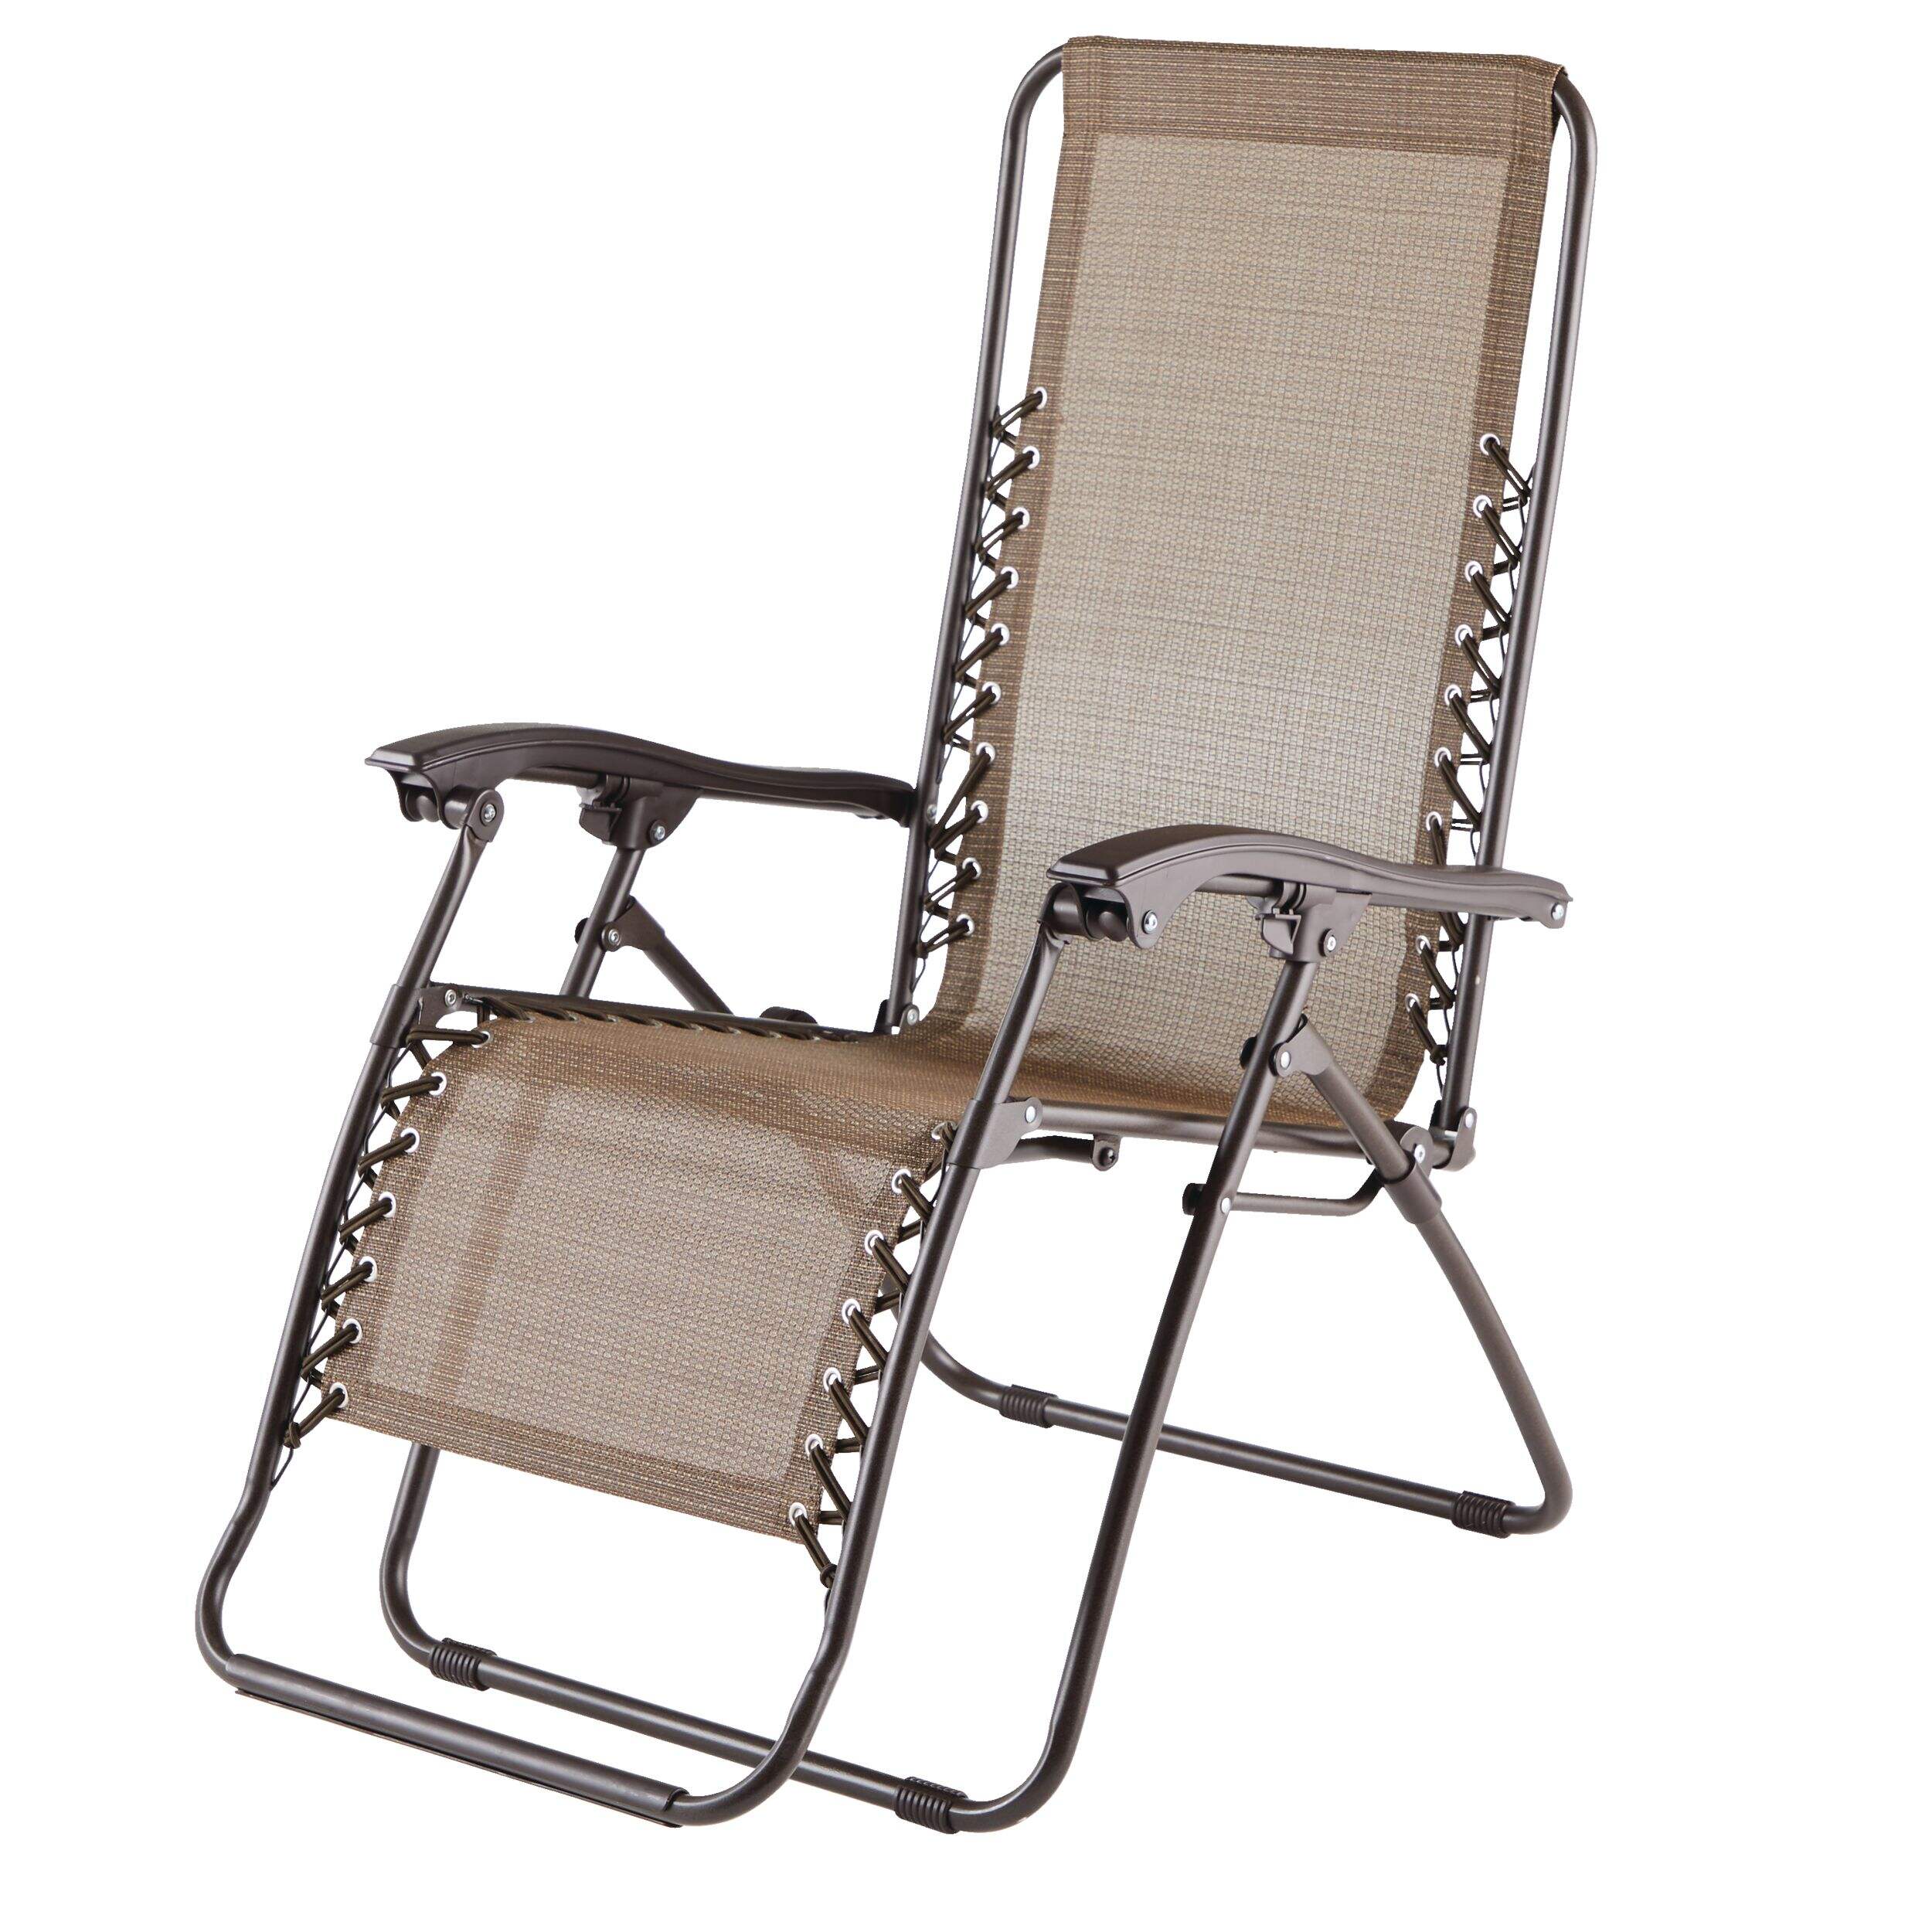 For Living Sling Zero Gravity Chair/Recliner, Brown | Canadian Tire